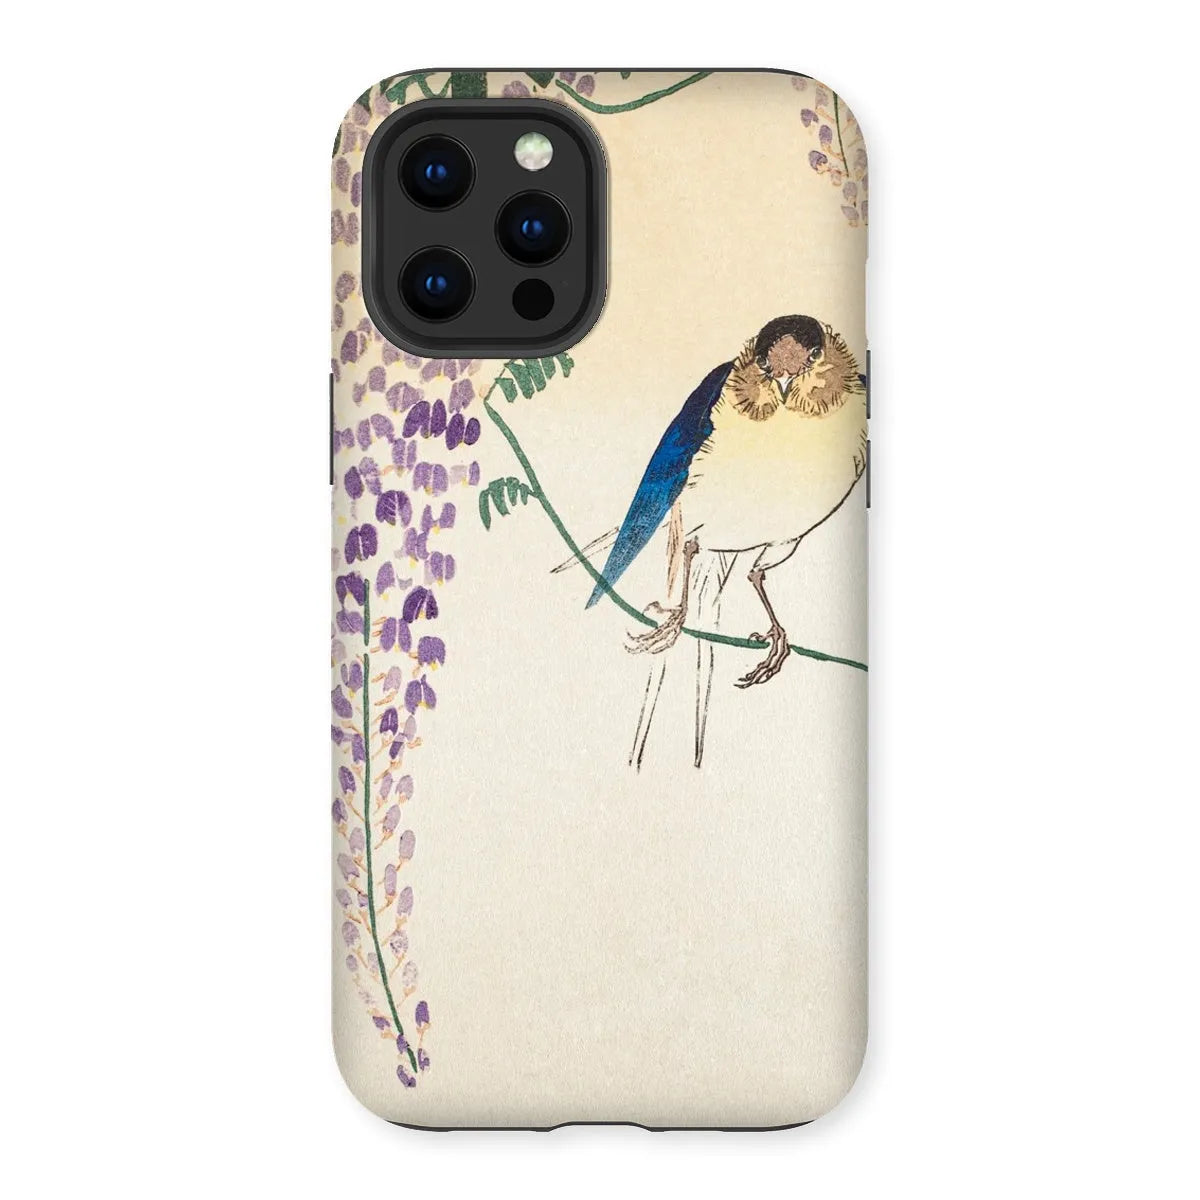 Wisteria And Swallow - Japanese Art Phone Case - Ohara Koson - Iphone 12 Pro Max / Matte - Mobile Phone Cases